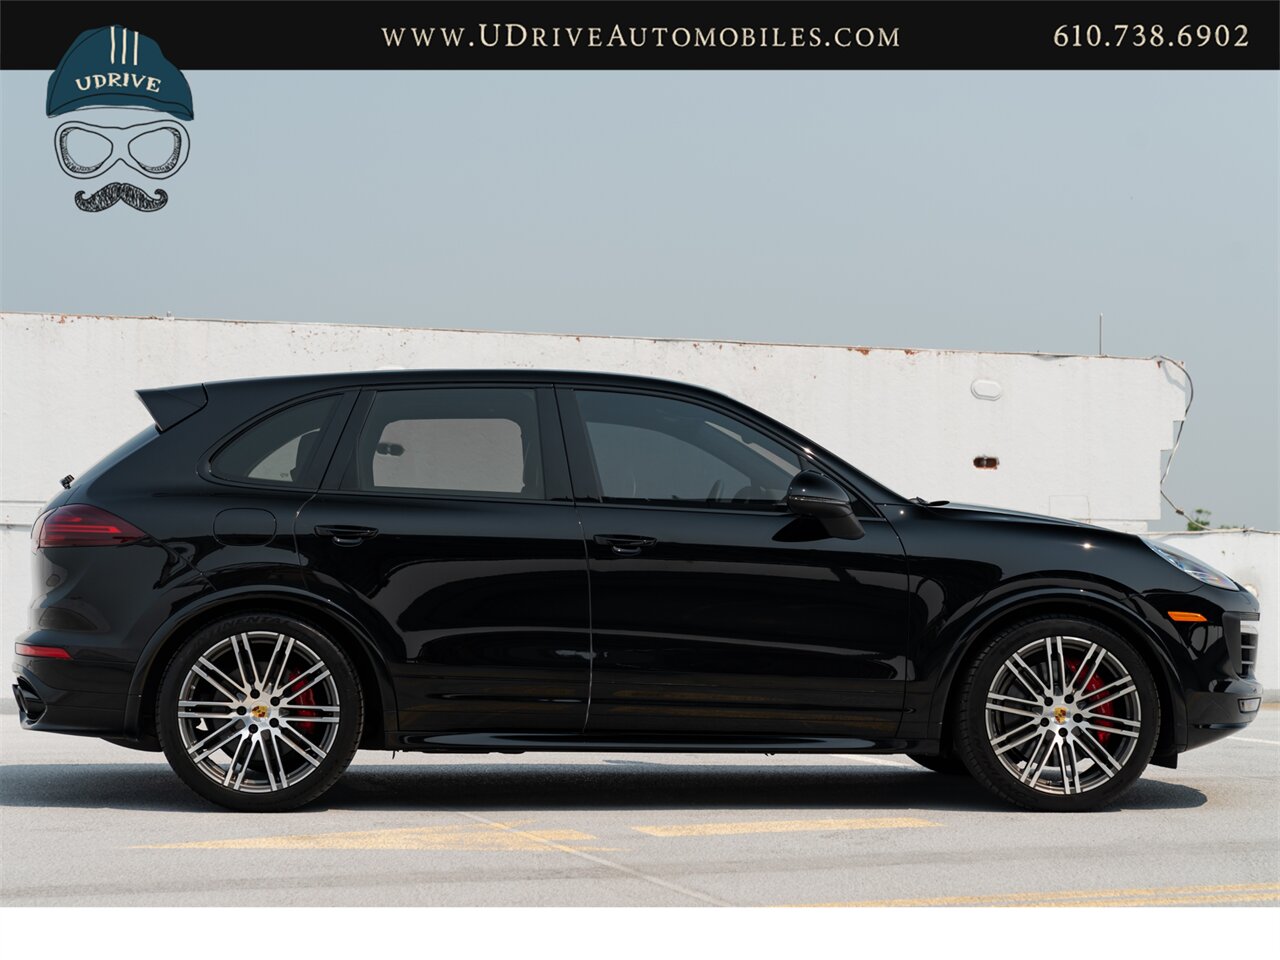 2016 Porsche Cayenne GTS  CPO Warranty 21in Whls Sport Chrono Red Dial Alcantara Red Belts Pano - Photo 18 - West Chester, PA 19382